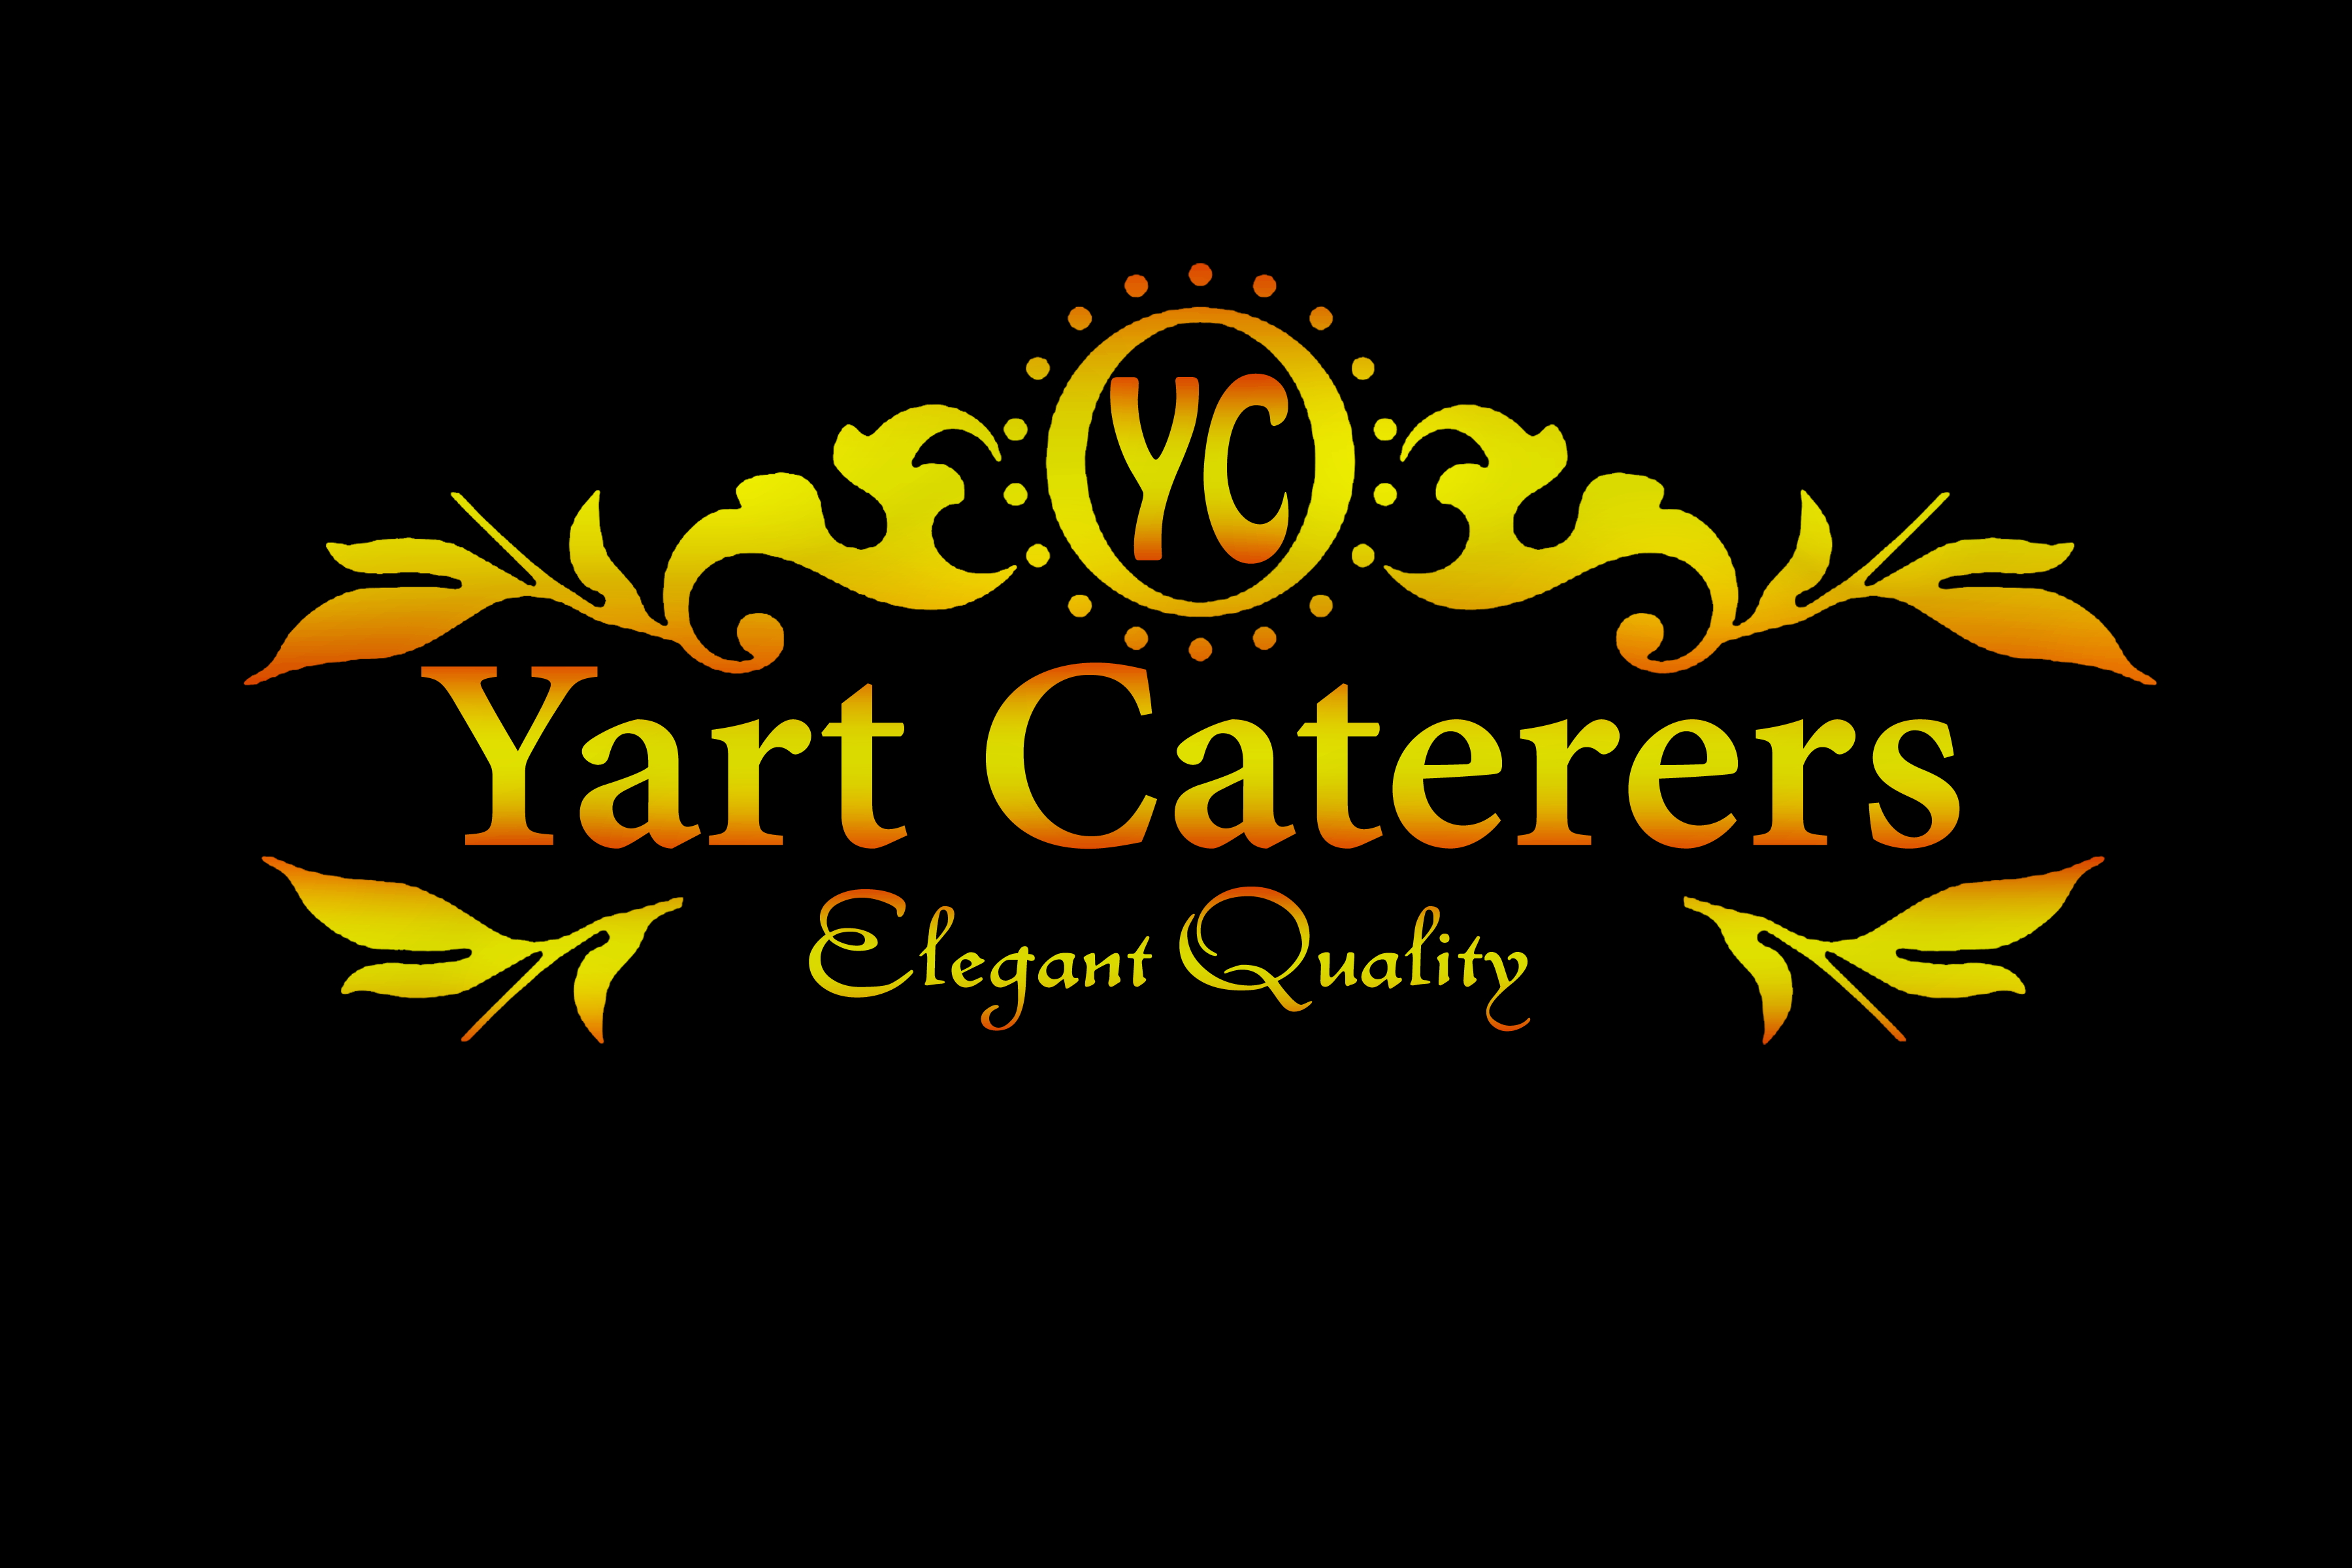 Yart Caterers - Best caterers in Chandigarh|Wedding Planner|Event Services